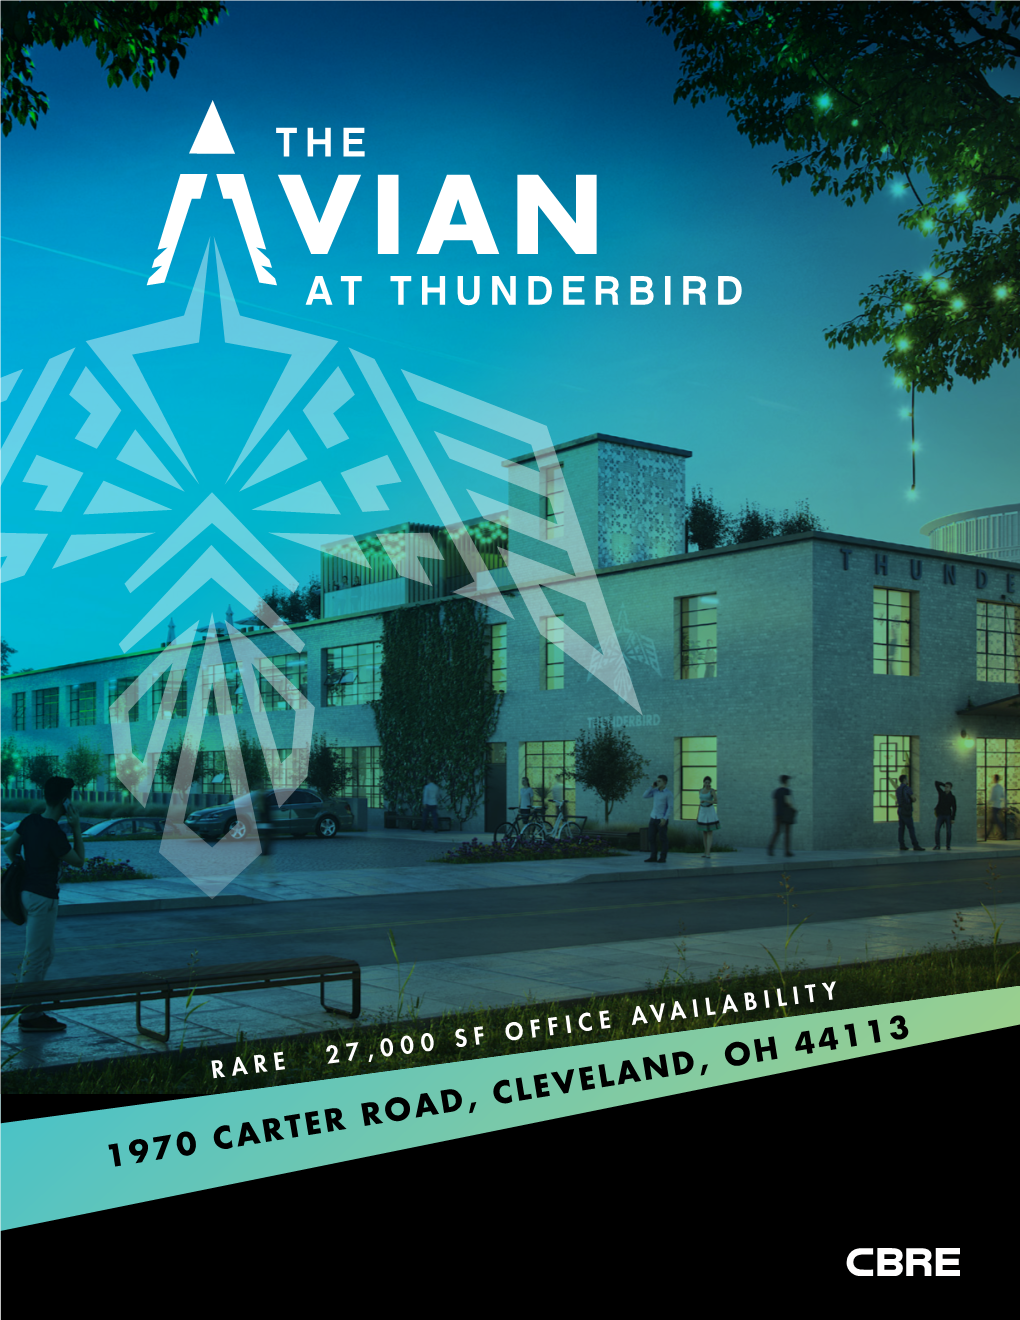 THE AVIAN at THUNDERBIRD Offers Office Tenants a Rare Opportunity to Be Part of Cleveland’S Newest Mixed-Use Neighborhood